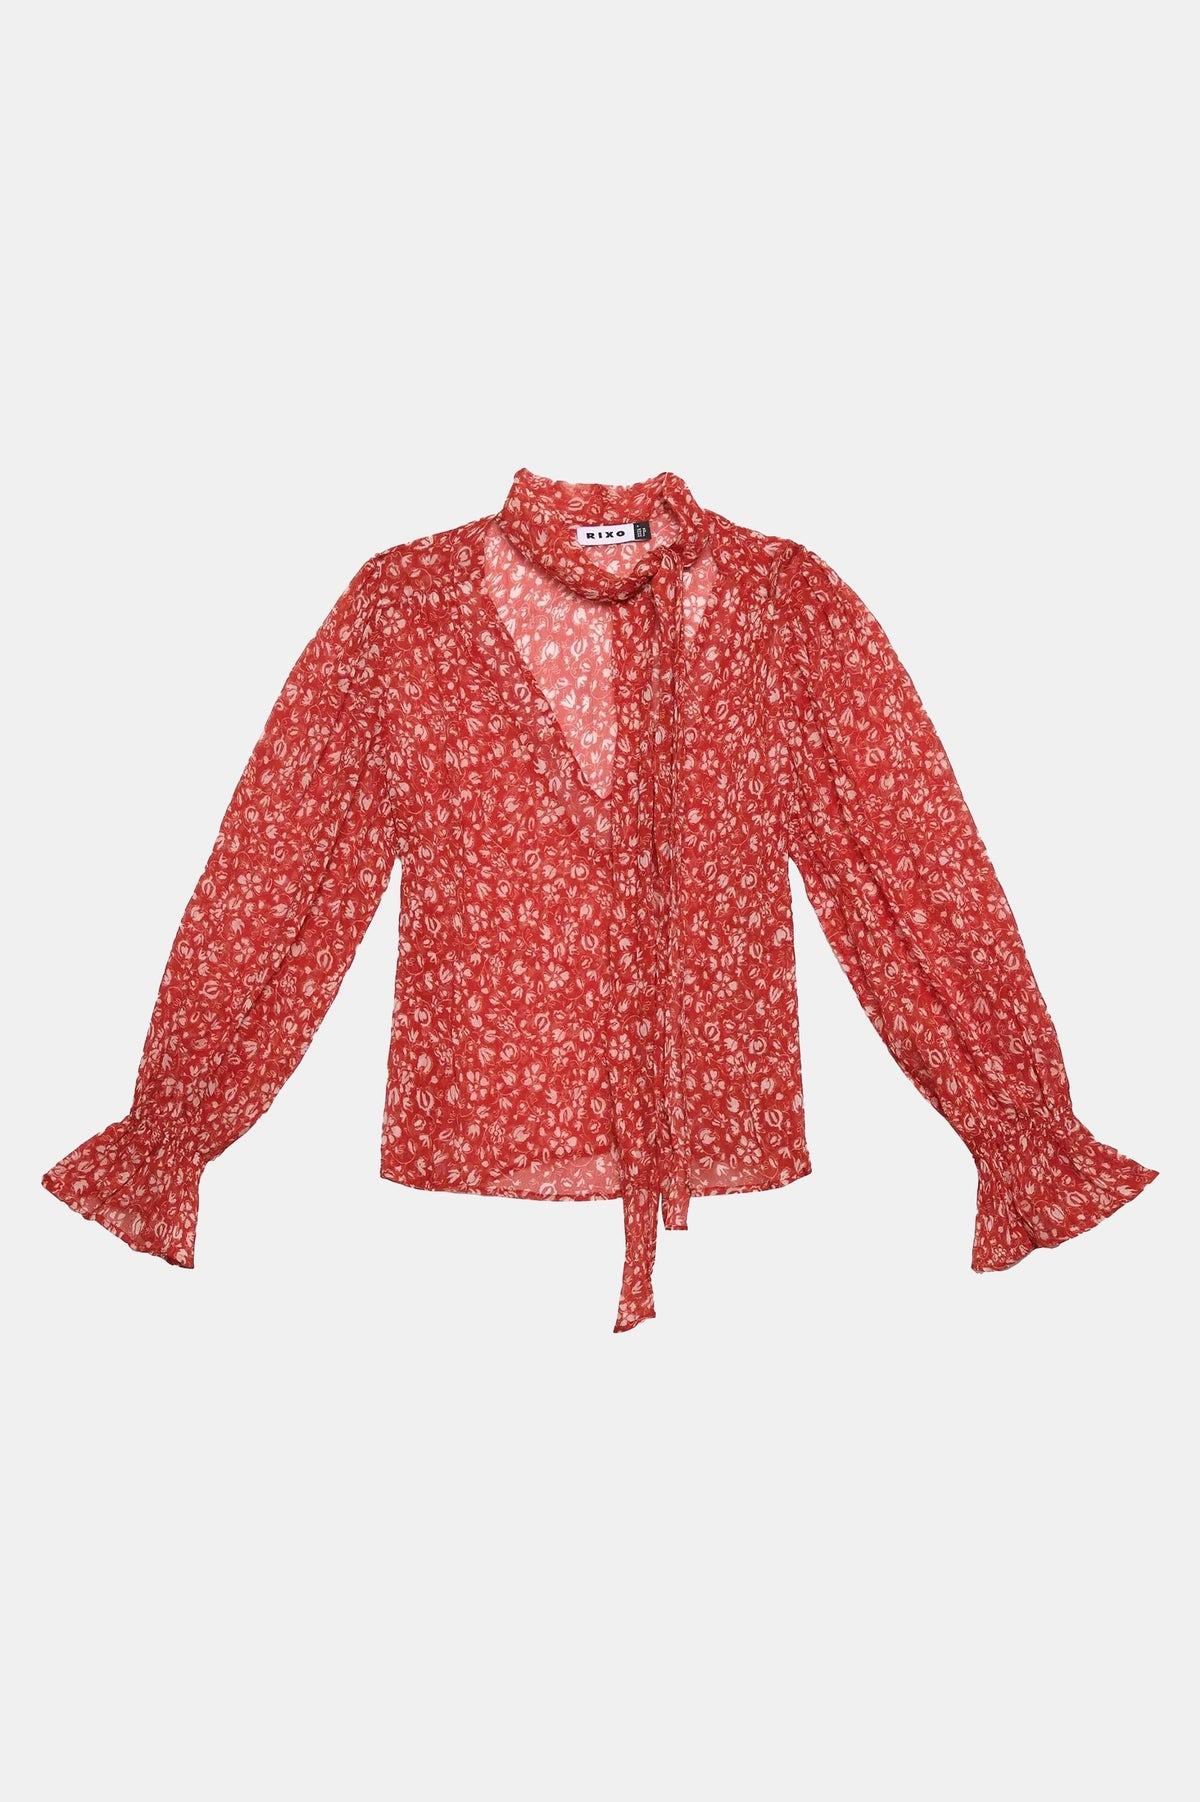 Amelie Blouse in Floral Red